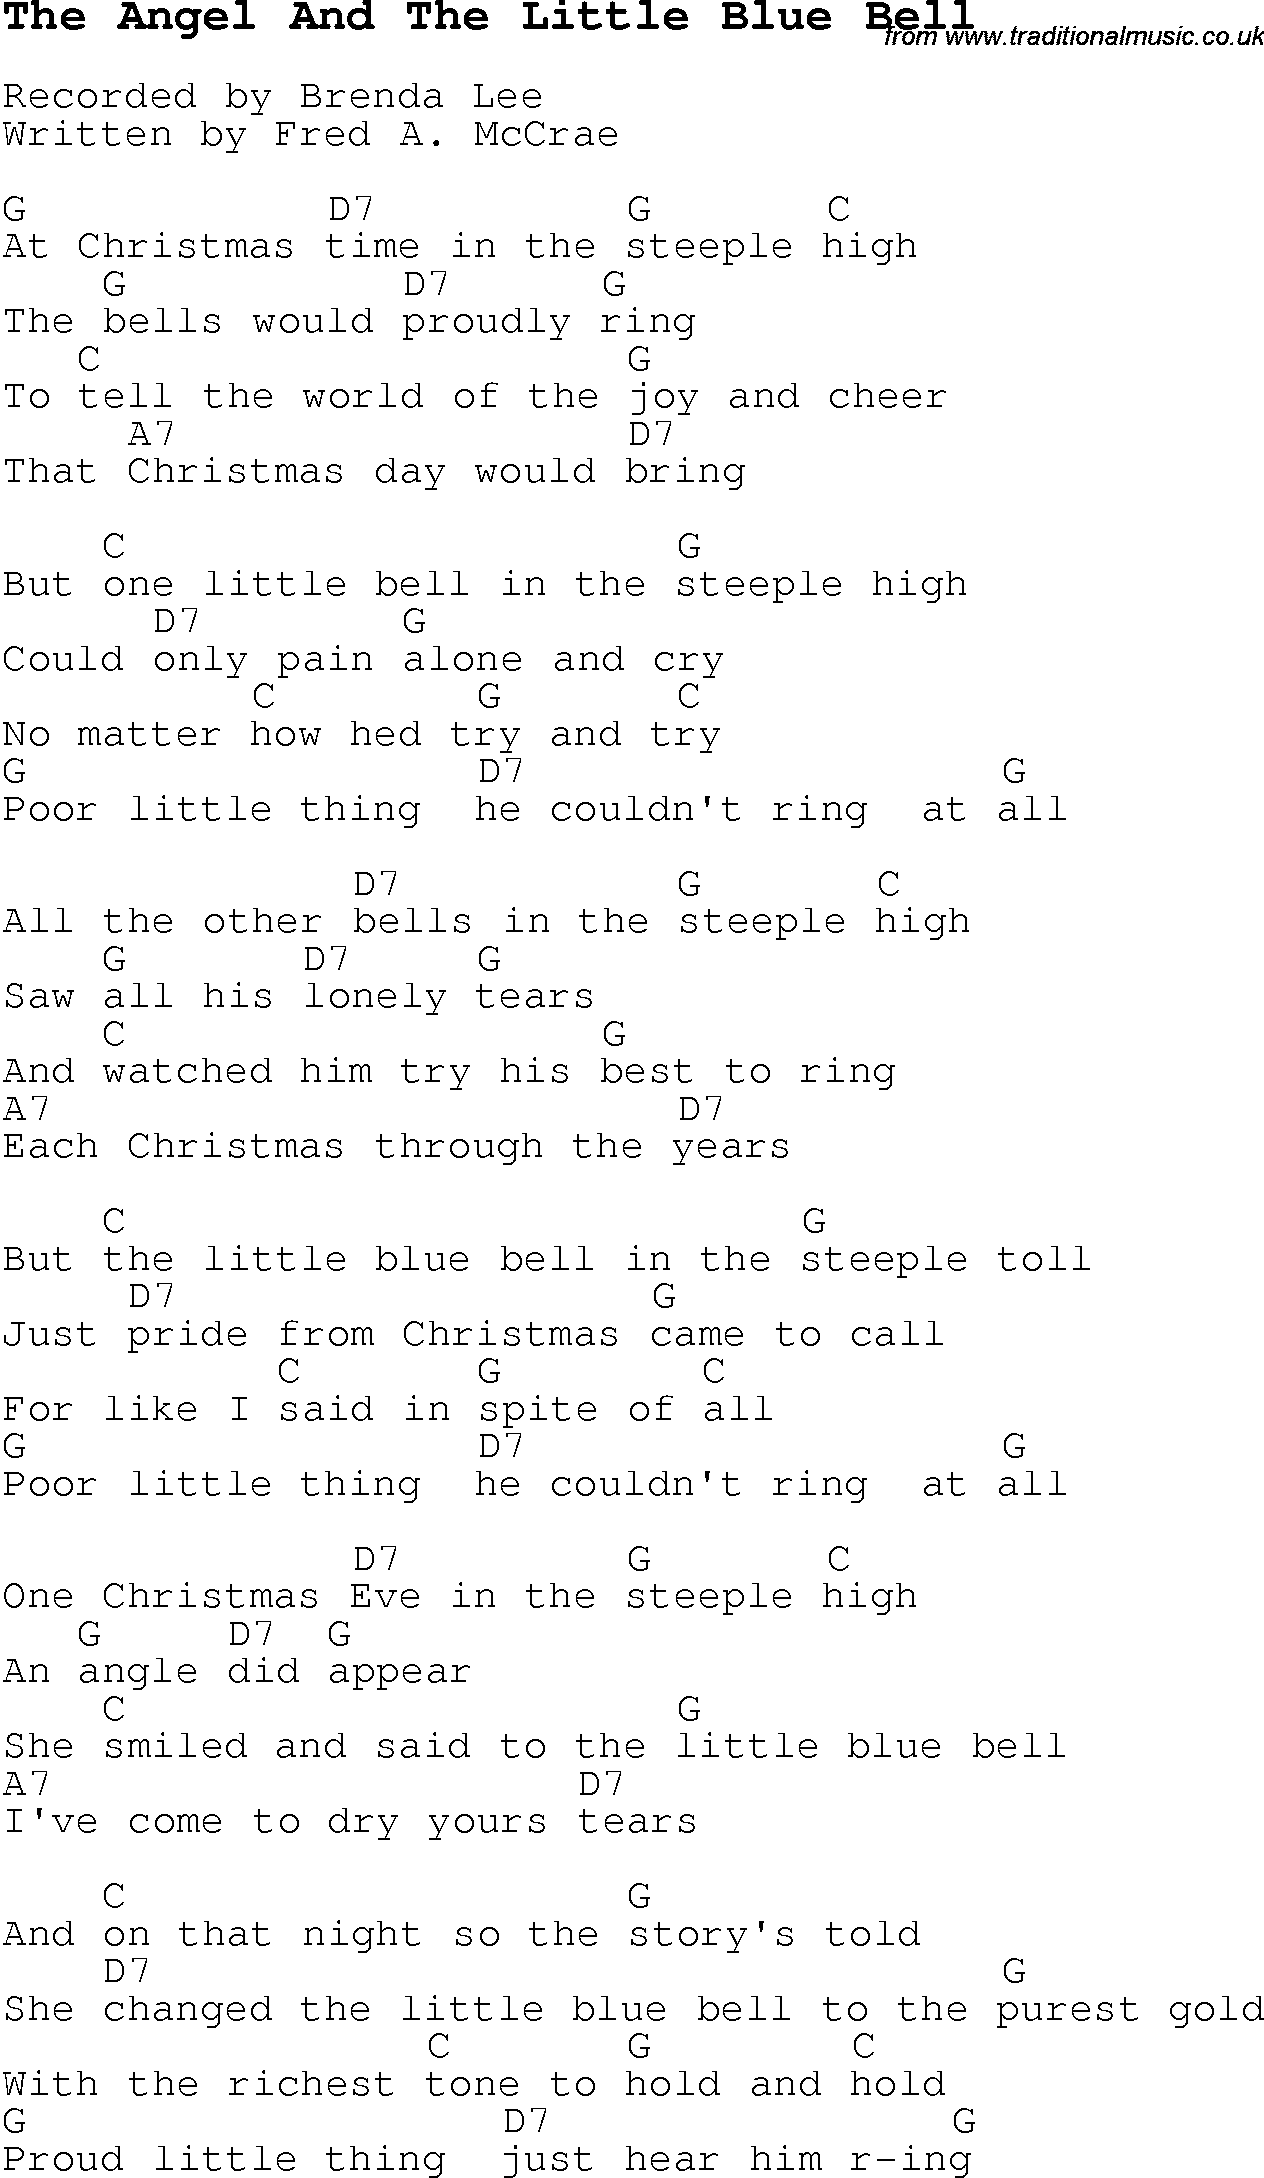 Christmas Carol/Song lyrics with chords for The Angel And The Little Blue Bell